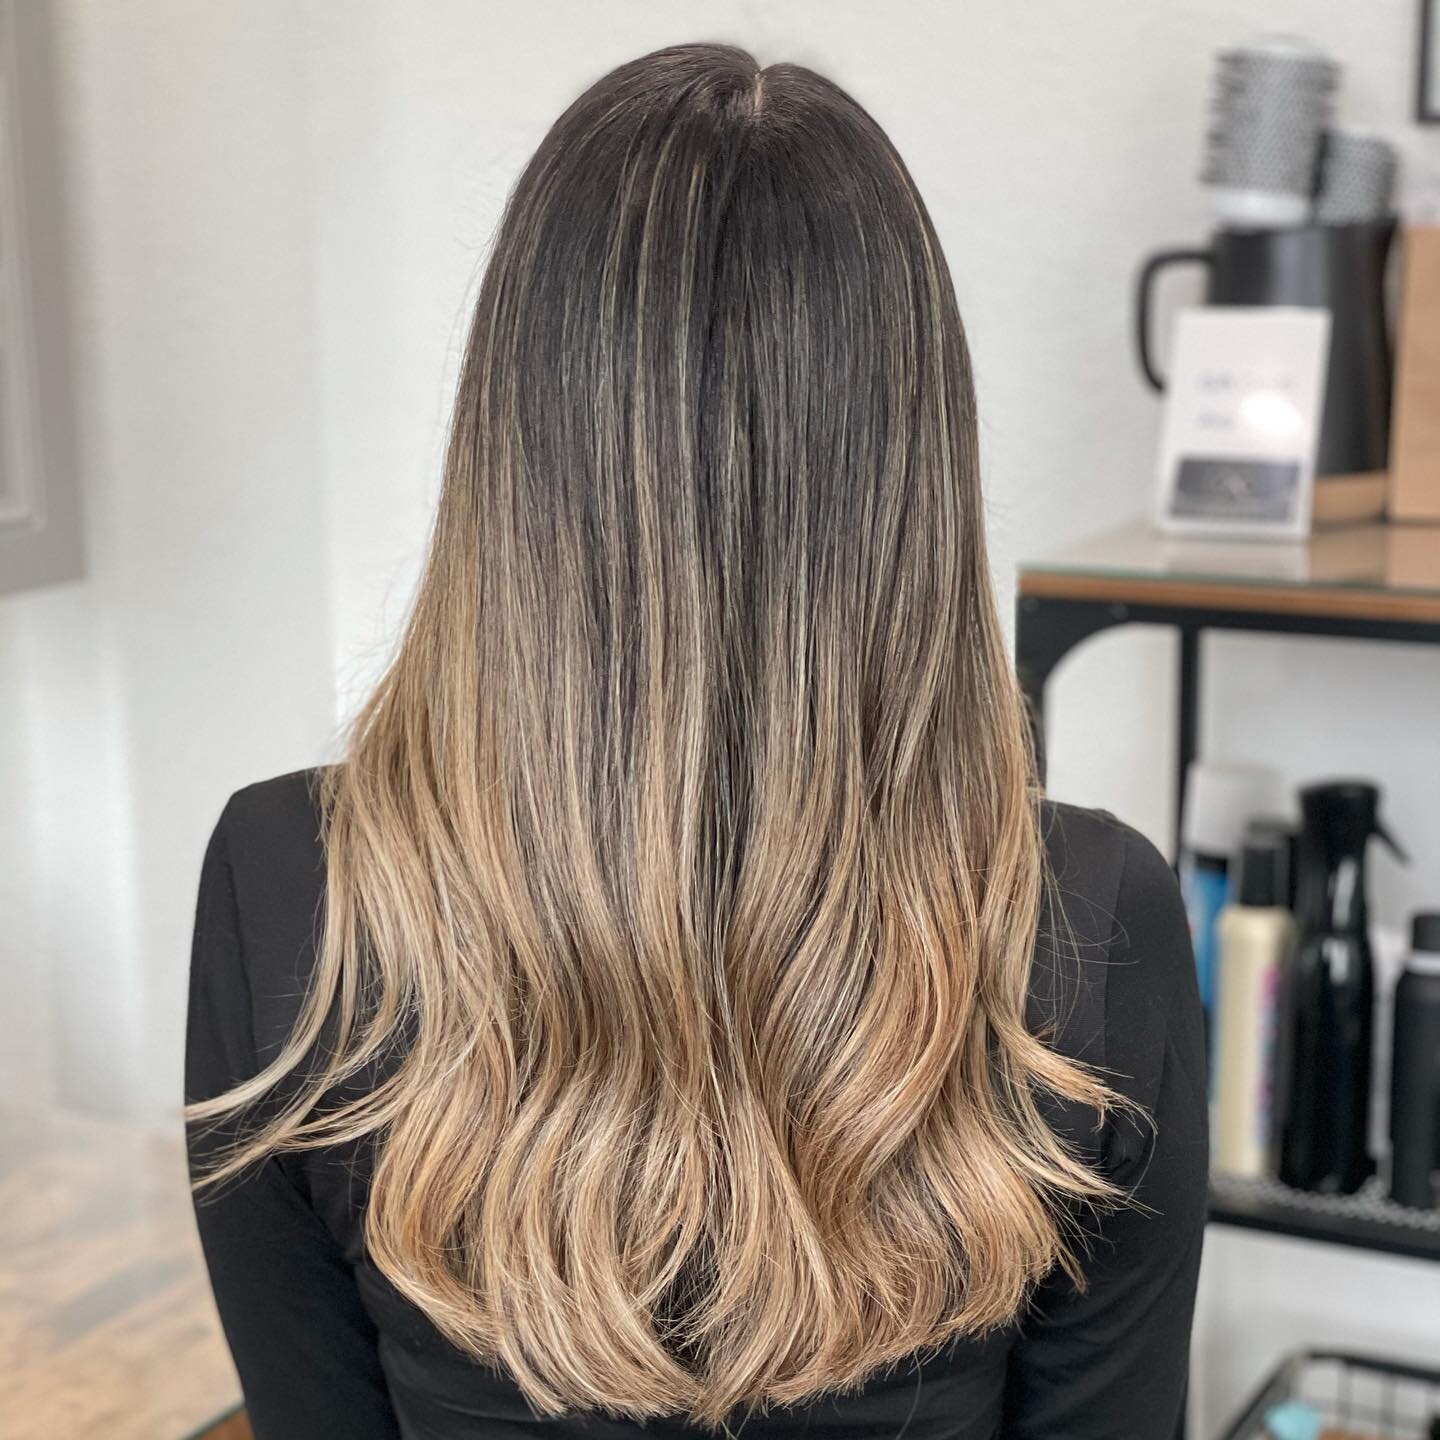 New year new YOU 🤩 this transformation was so much fun!! There was a lot of lightener and a lot of foils involved but in the end it was all worth it! Pre book now for your new look! 

#balayagehighlights #balayagehouston #balayagecypresstx #cypresst